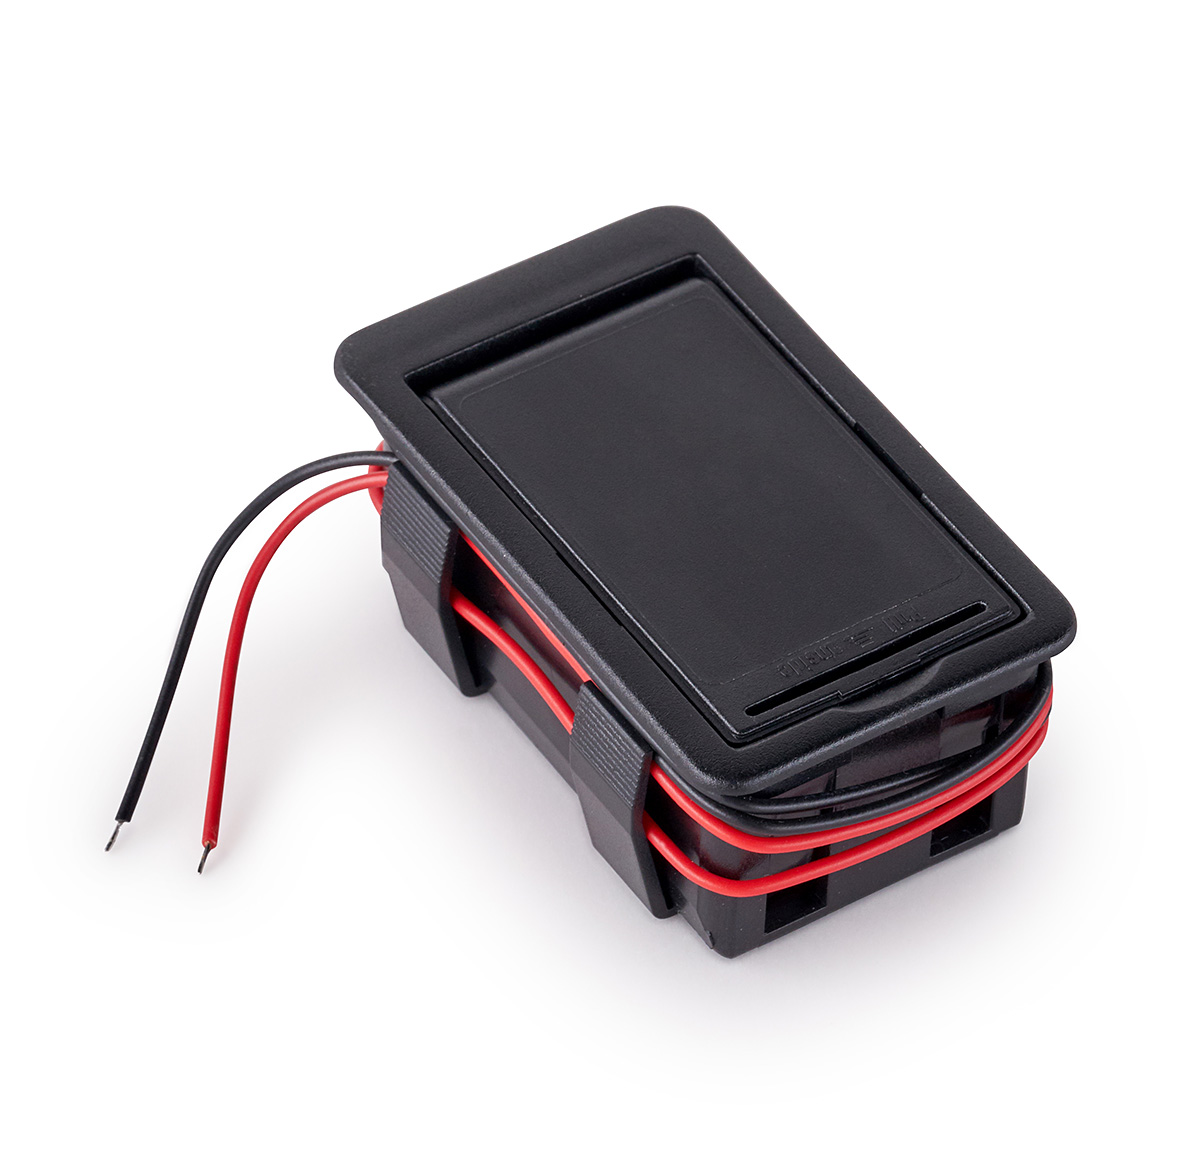 MEC Exterior Battery Compartment for 1 x 9V Battery